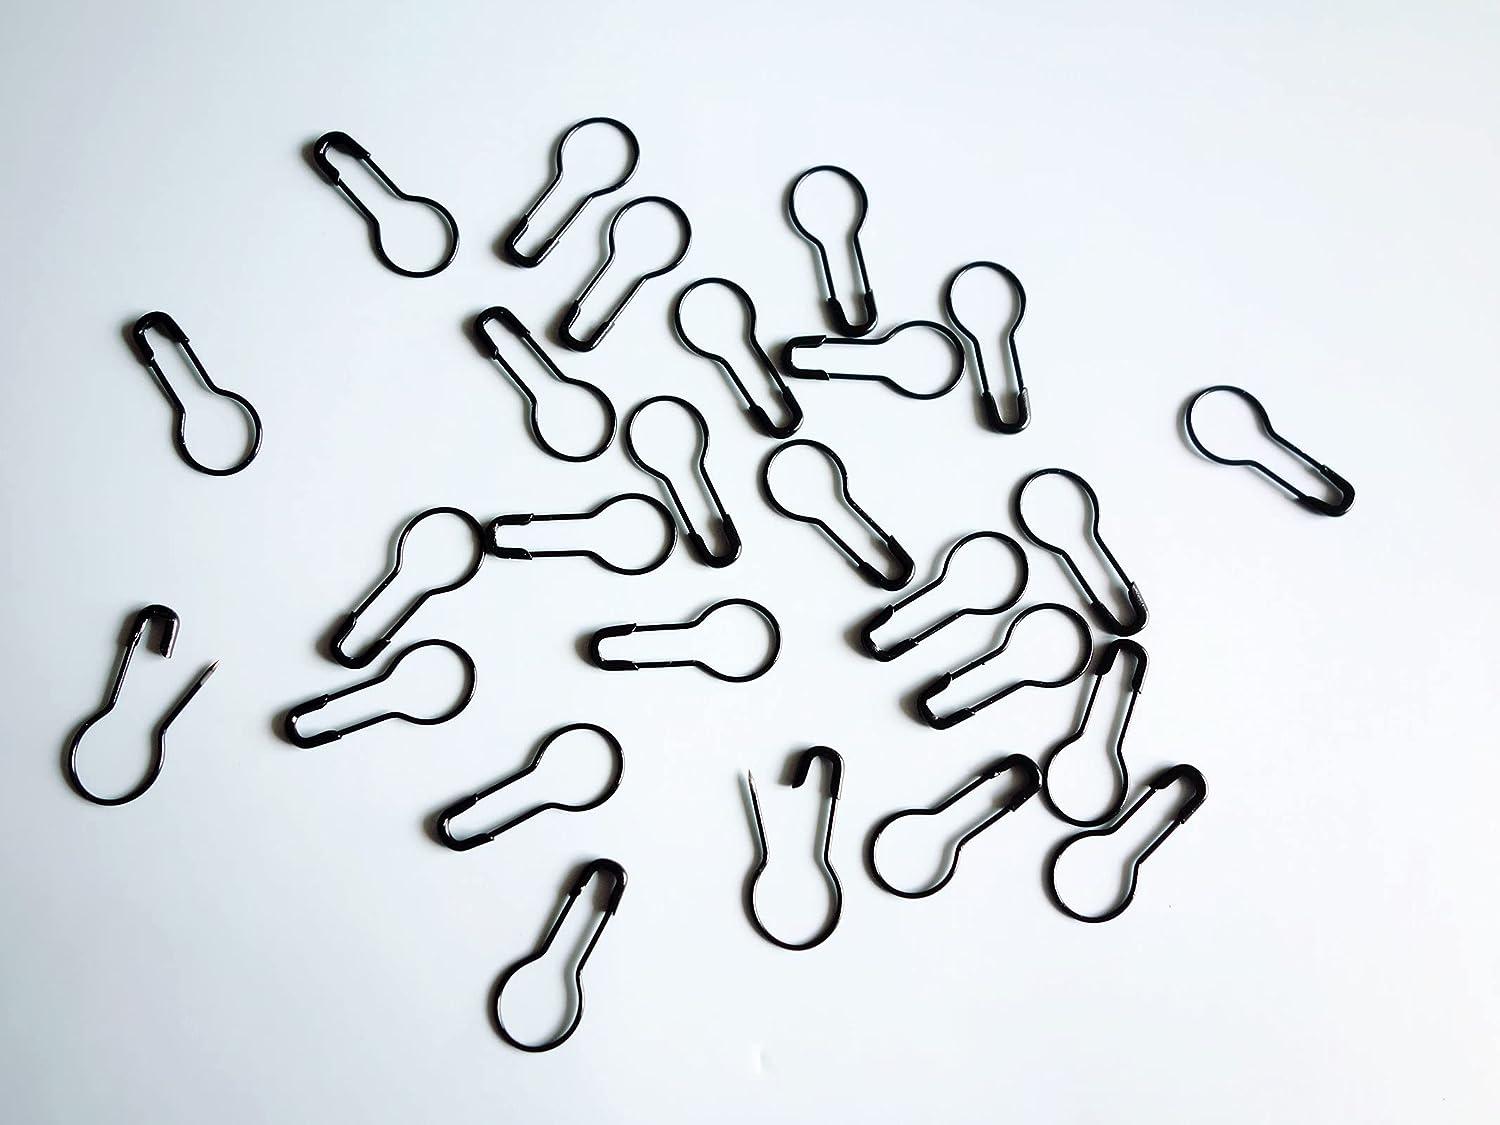 1000 pcs Small Safety Pins for Clothes Black Bulk Blub Pin for